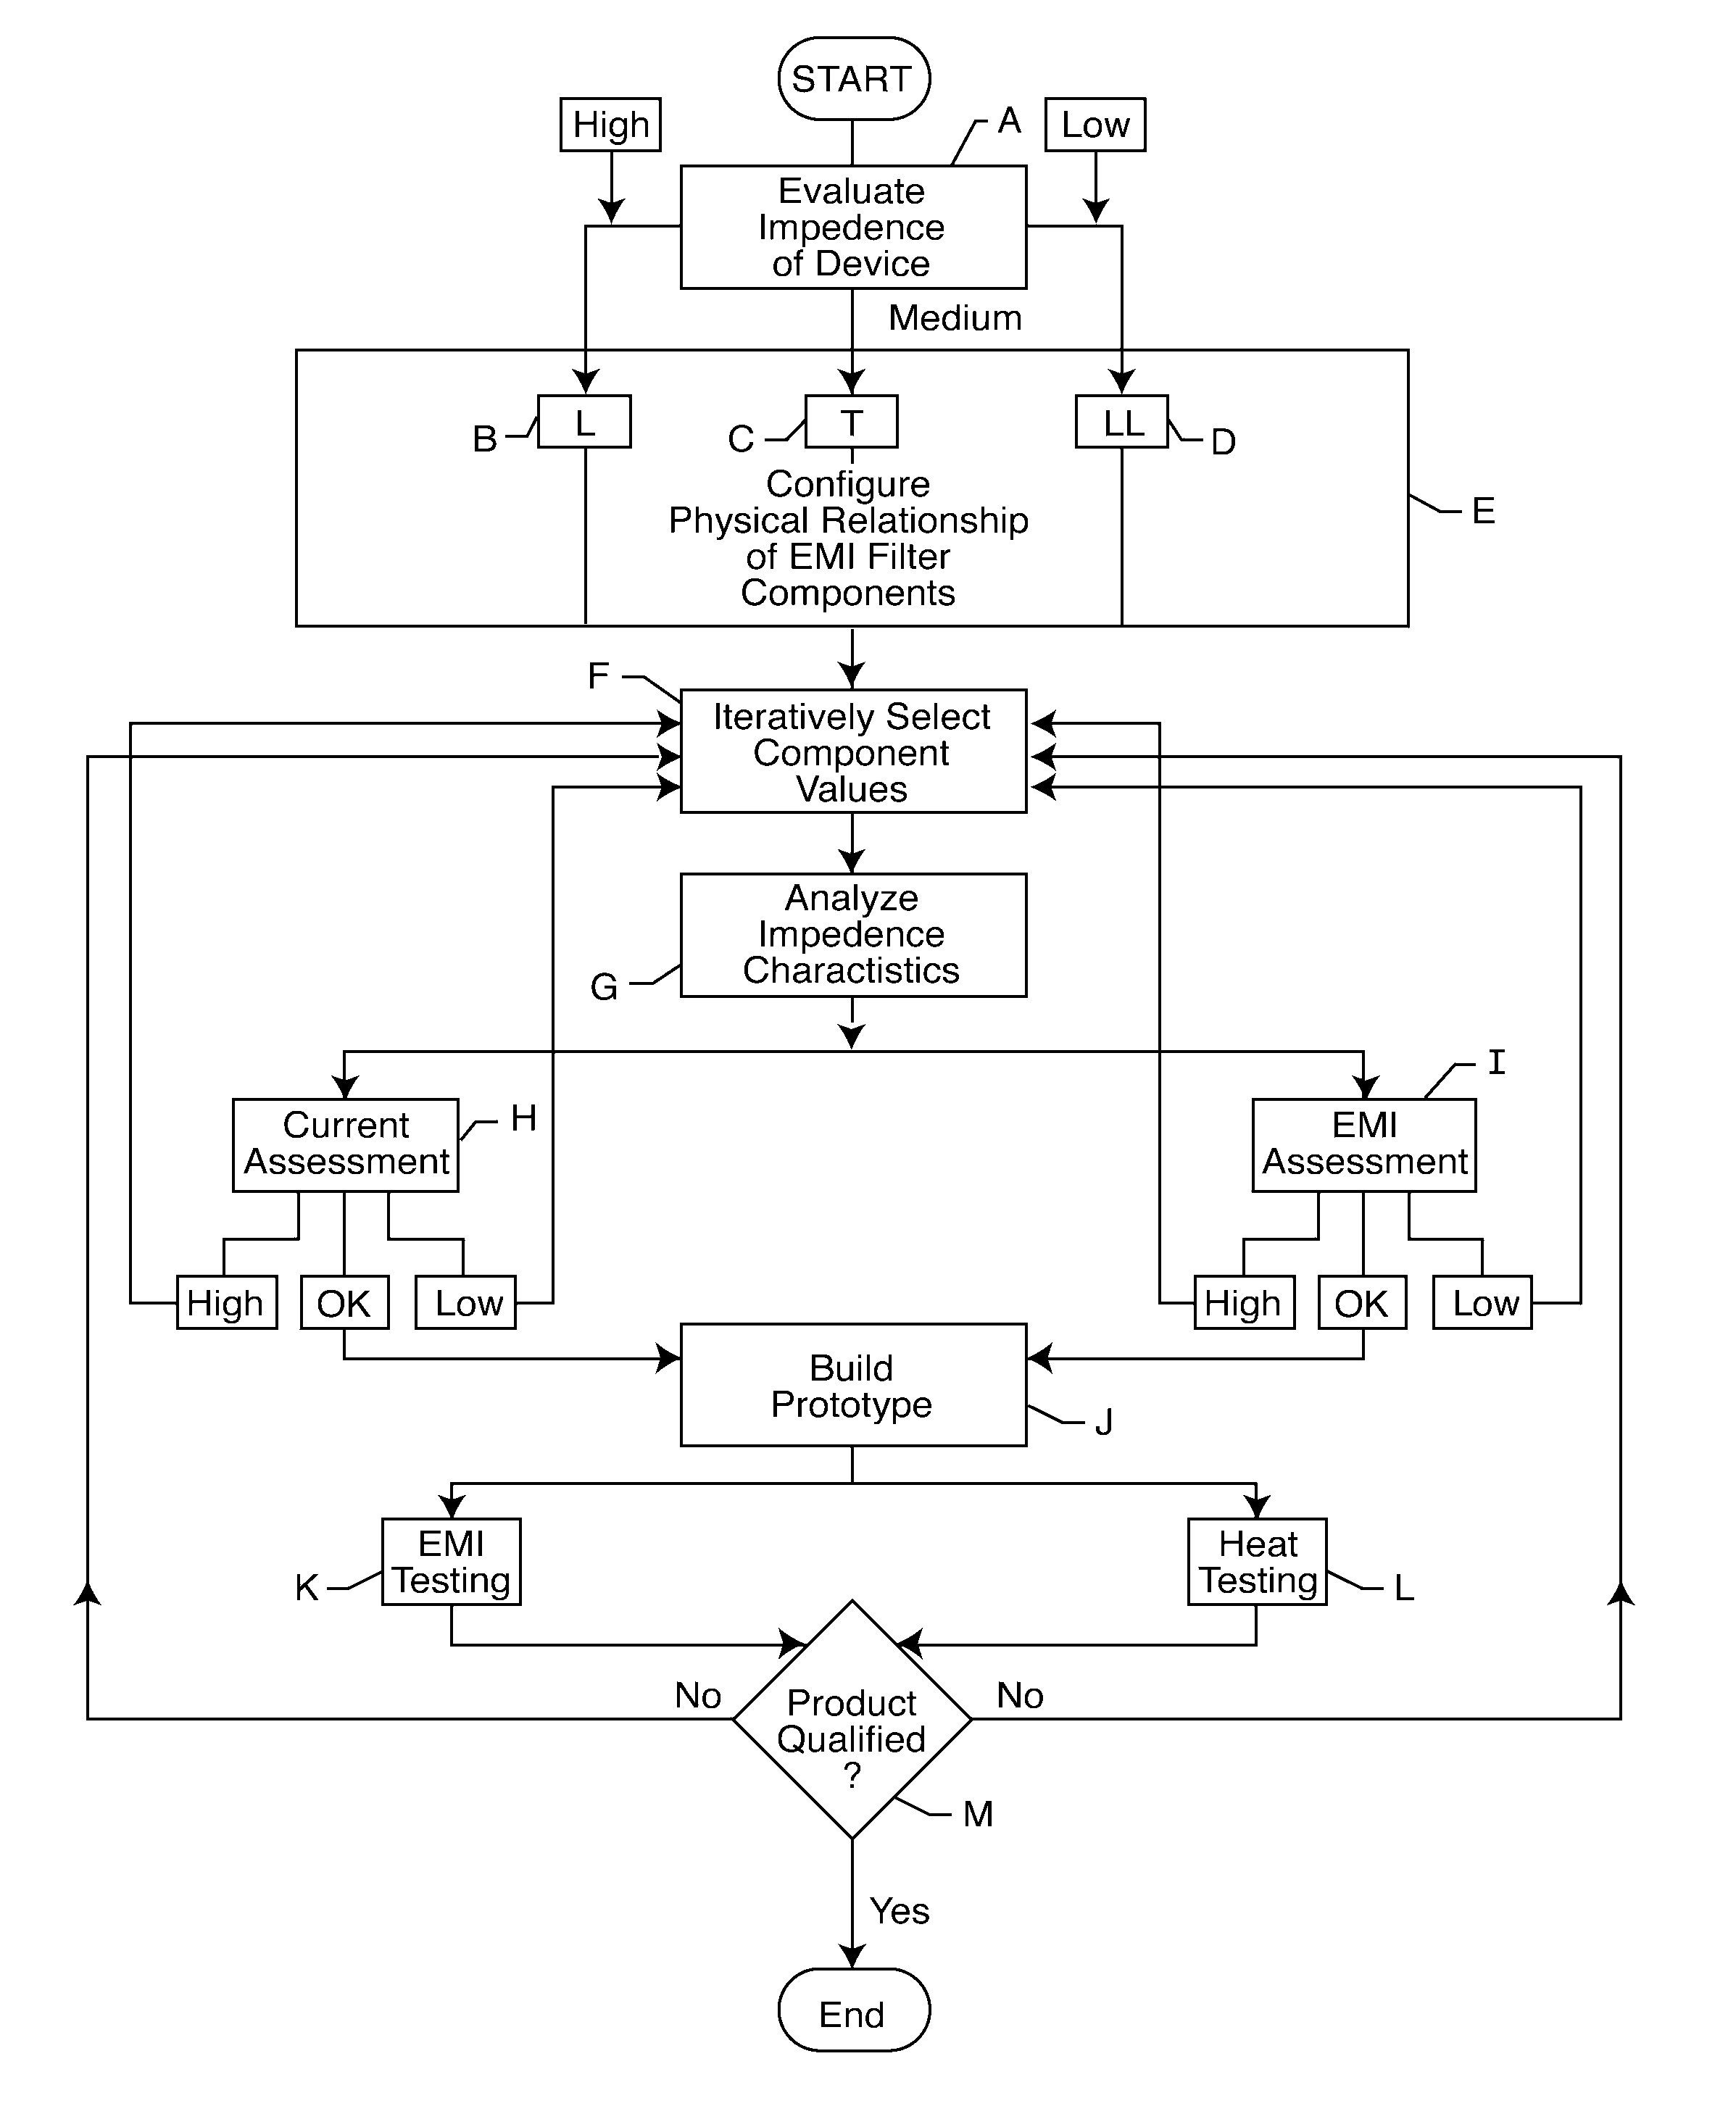 Process for tuning an EMI filter to reduce the amount of heat generated in implanted lead wires during medical procedures such as magnetic resonance imaging